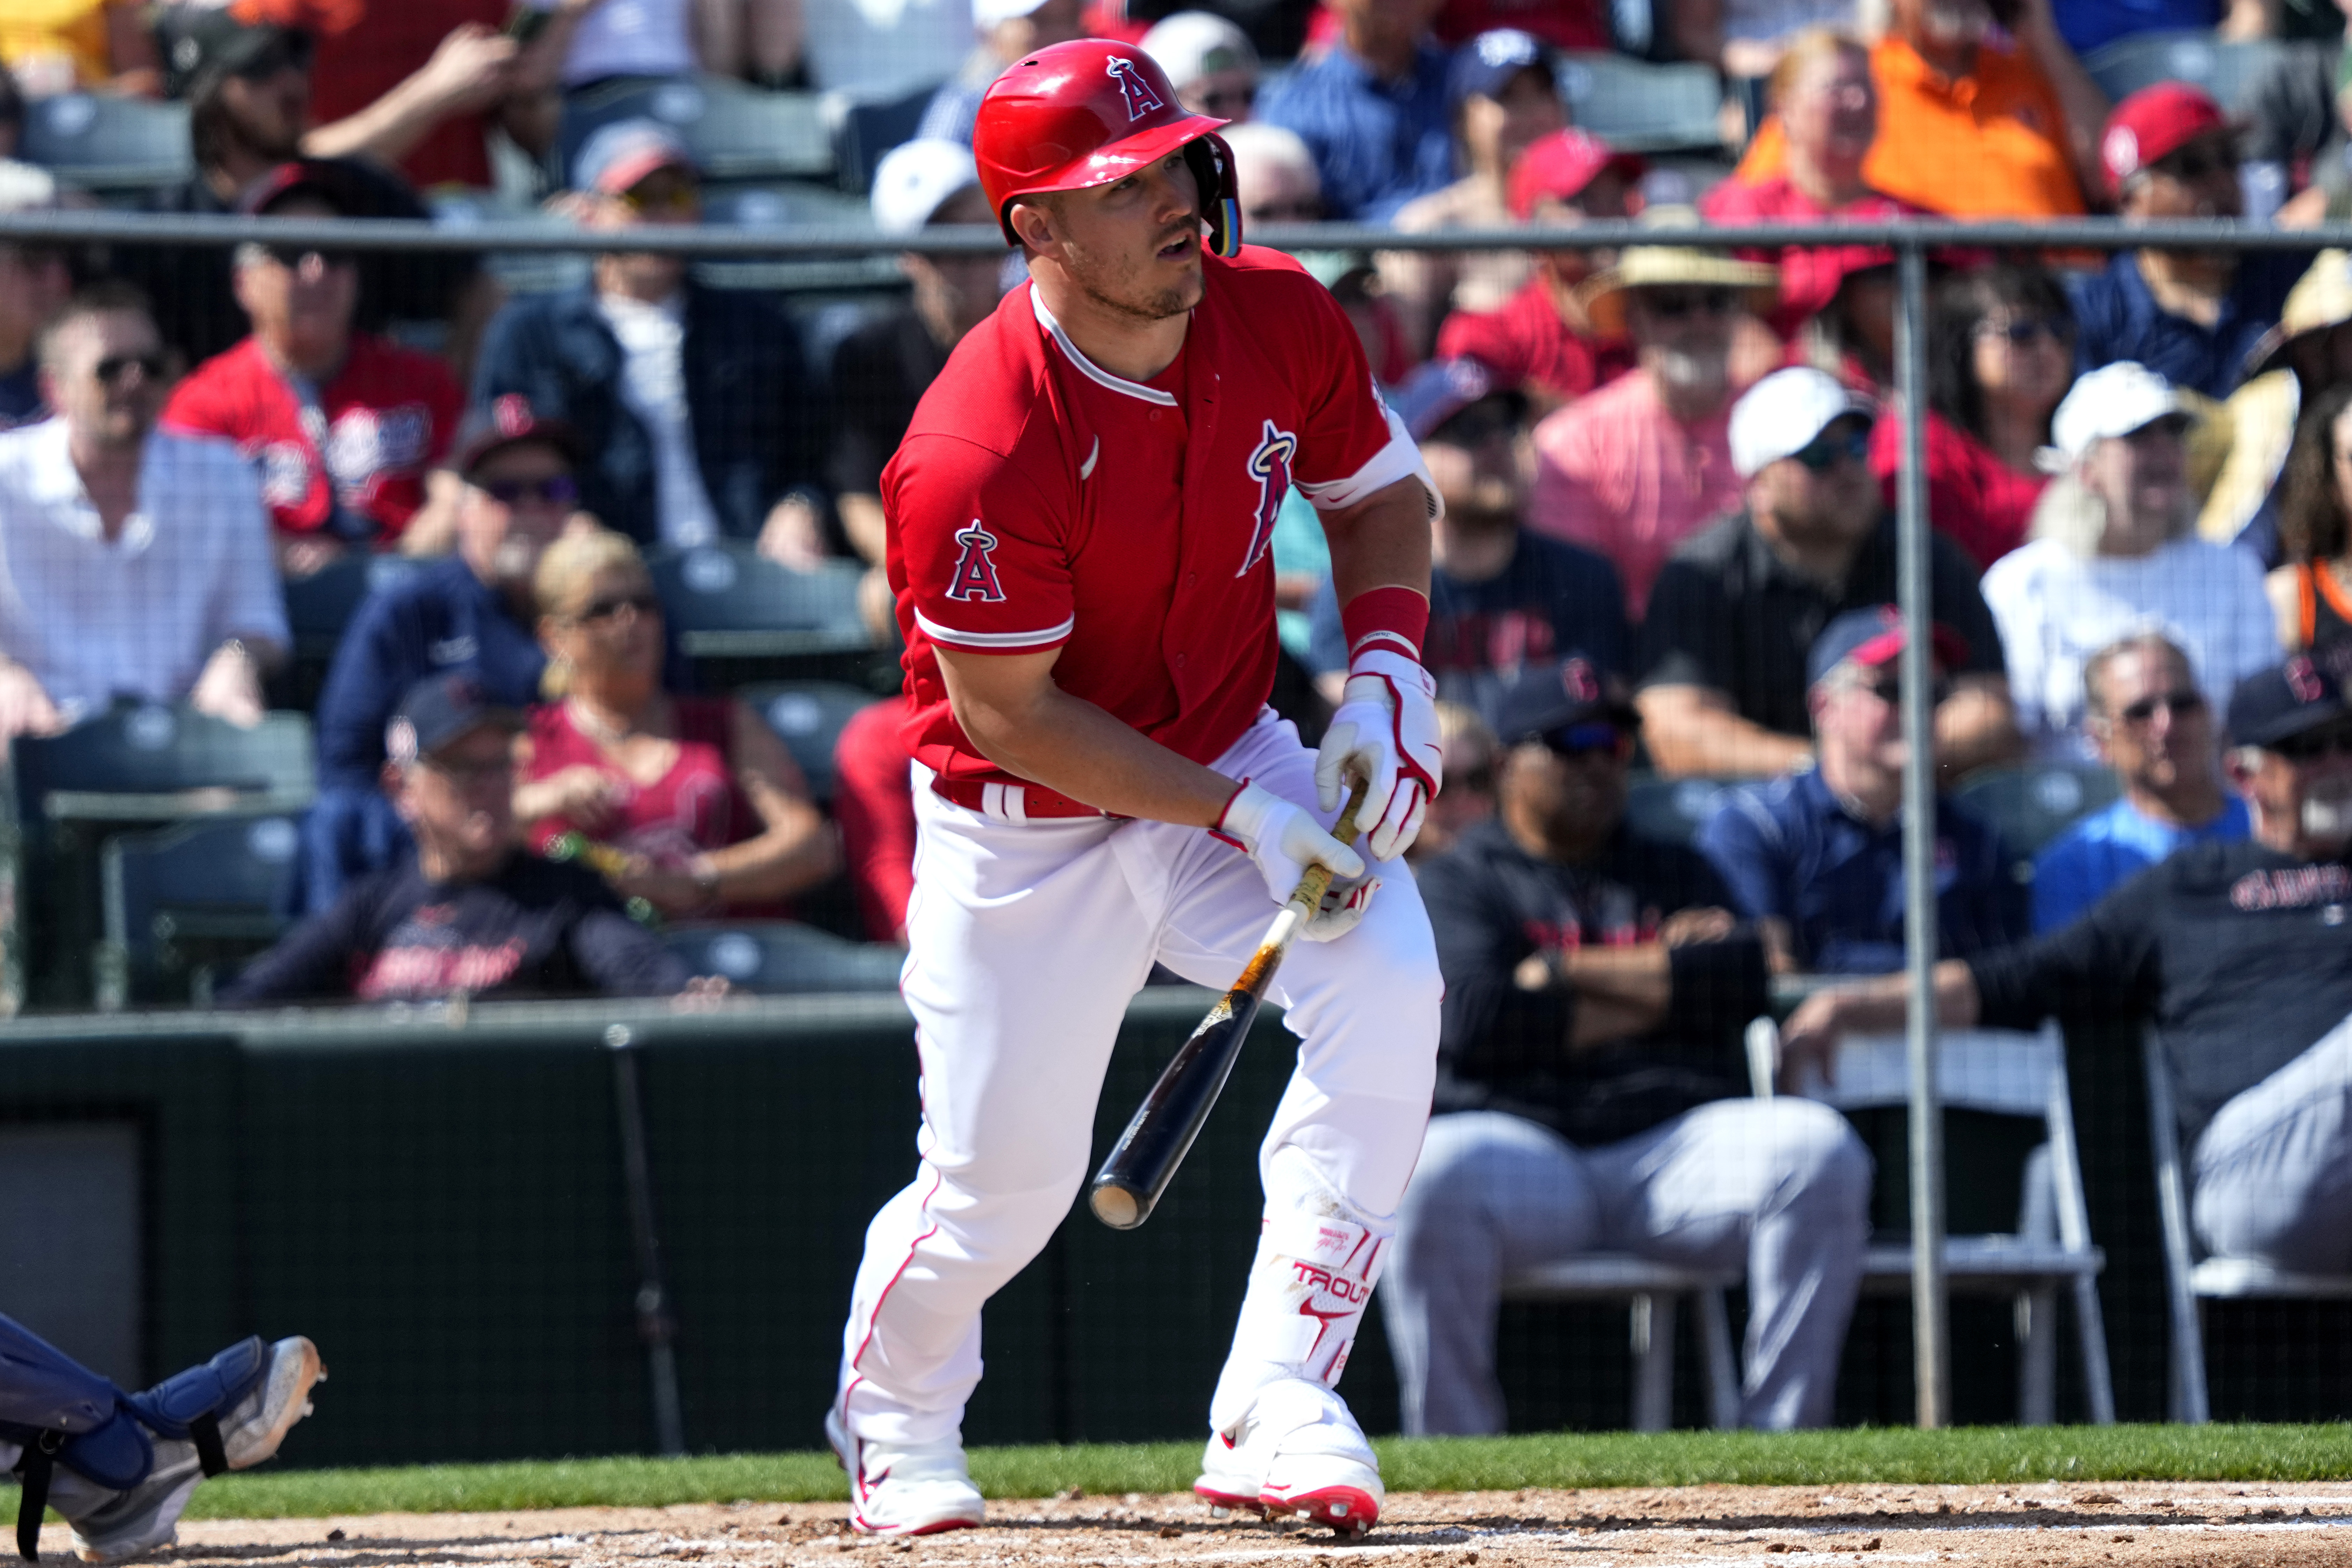 USA World Baseball Classic roster: Mike Trout, Mookie Betts headline  star-studded Team USA for 2023 WBC